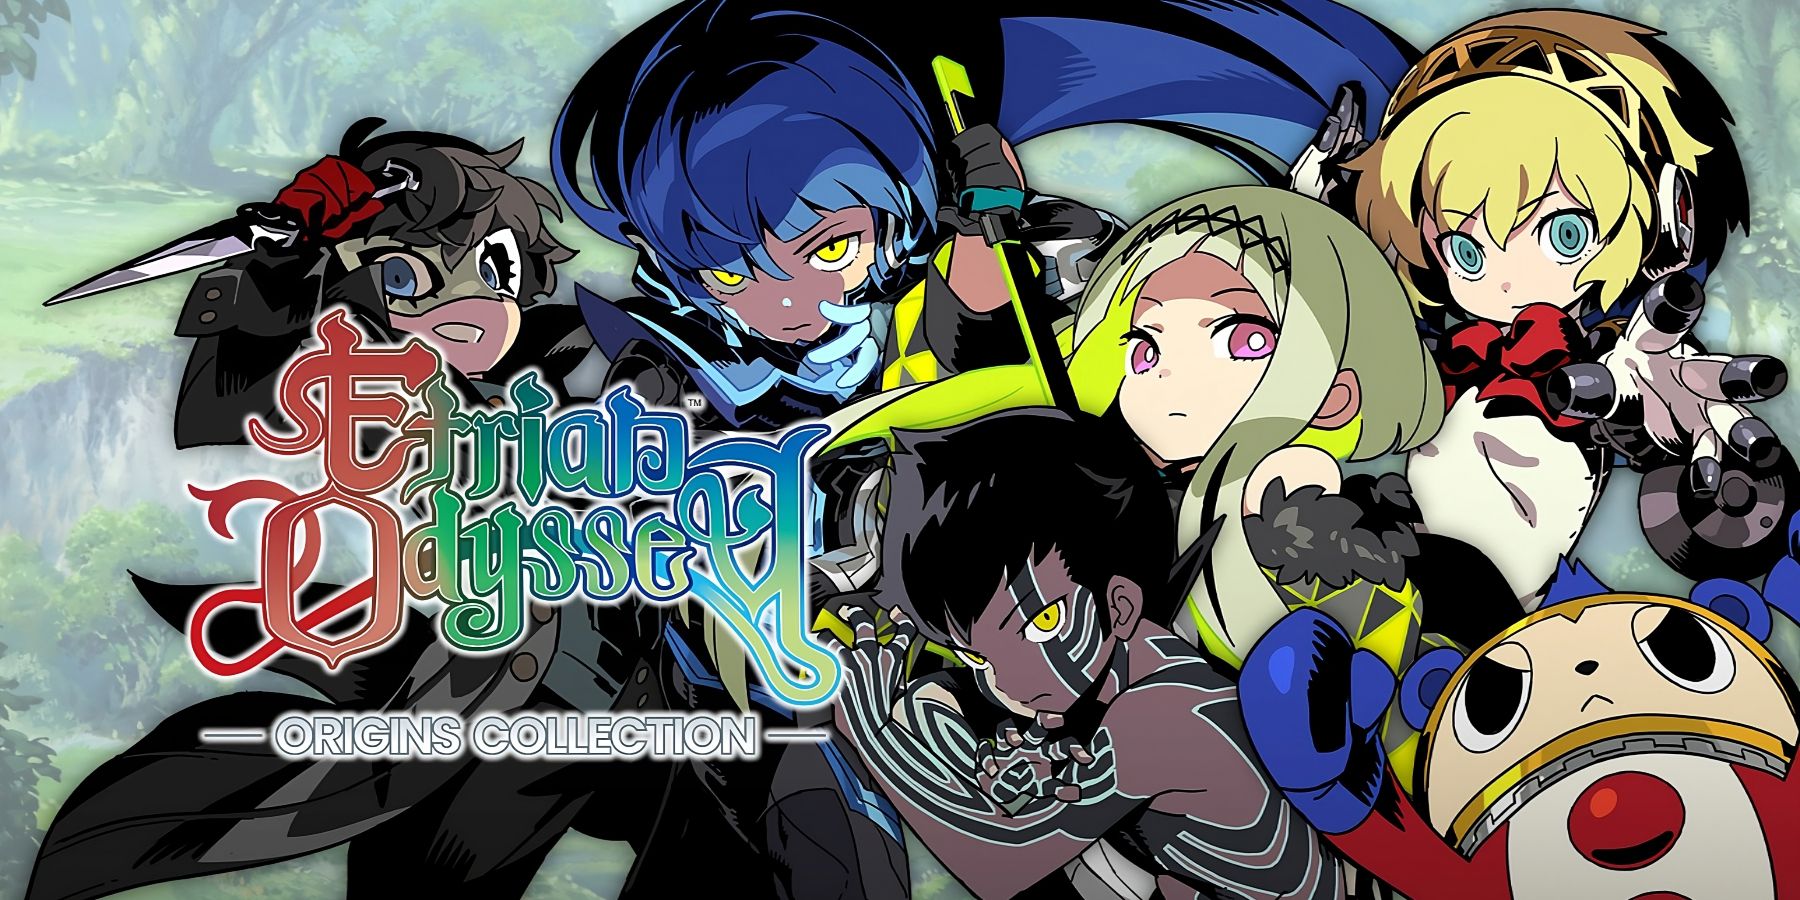 Alternate cover of the Etrian Odyssey Origins collection